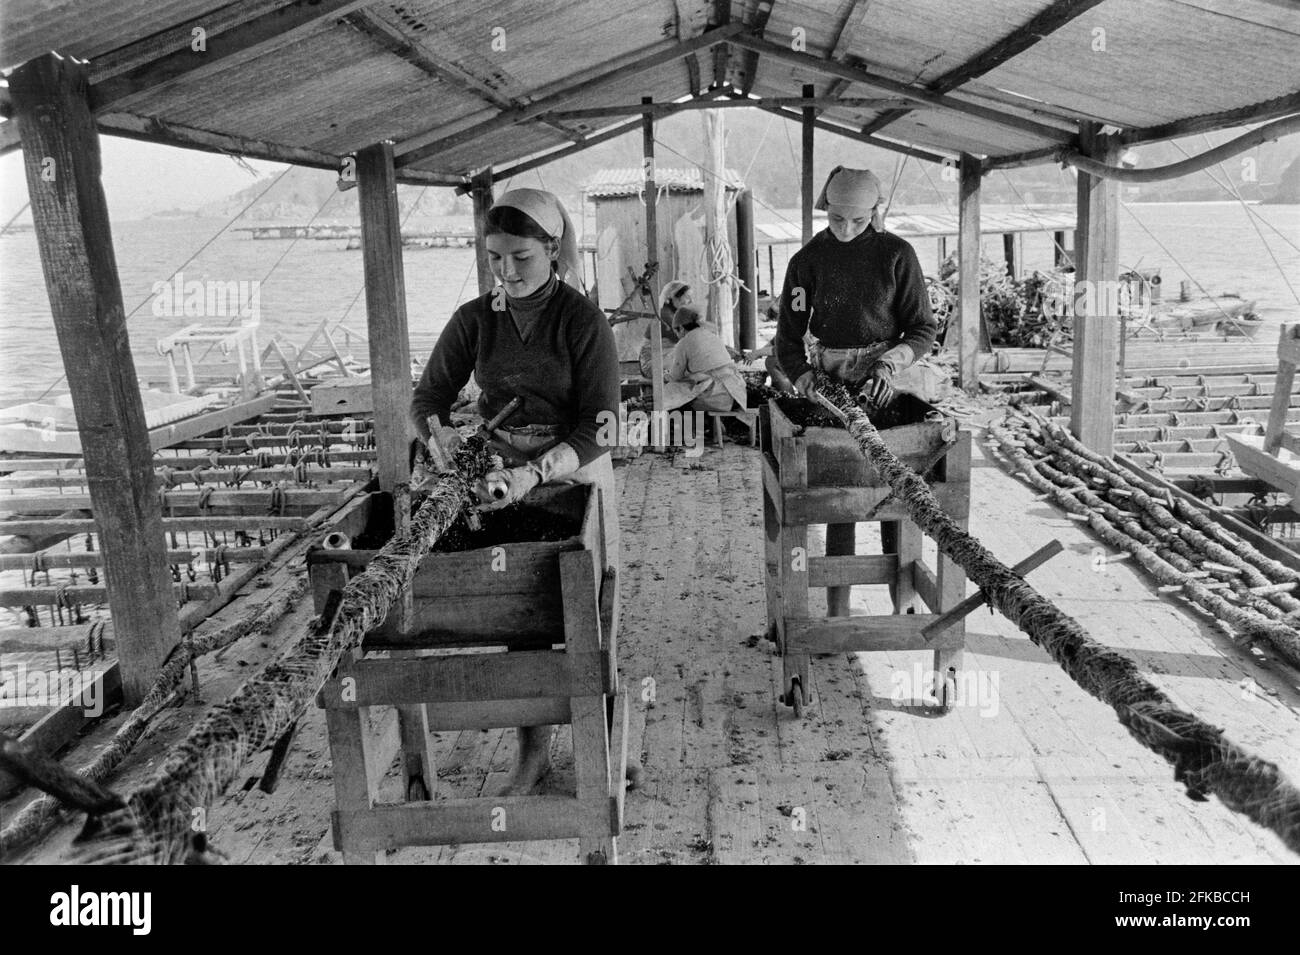 SPAIN - Galicia - 1970. women working on the mussel cultivation rafts in the bay of Lorbe near A Coruña, Galicia, North west Spain. Photo Copyright: P Stock Photo